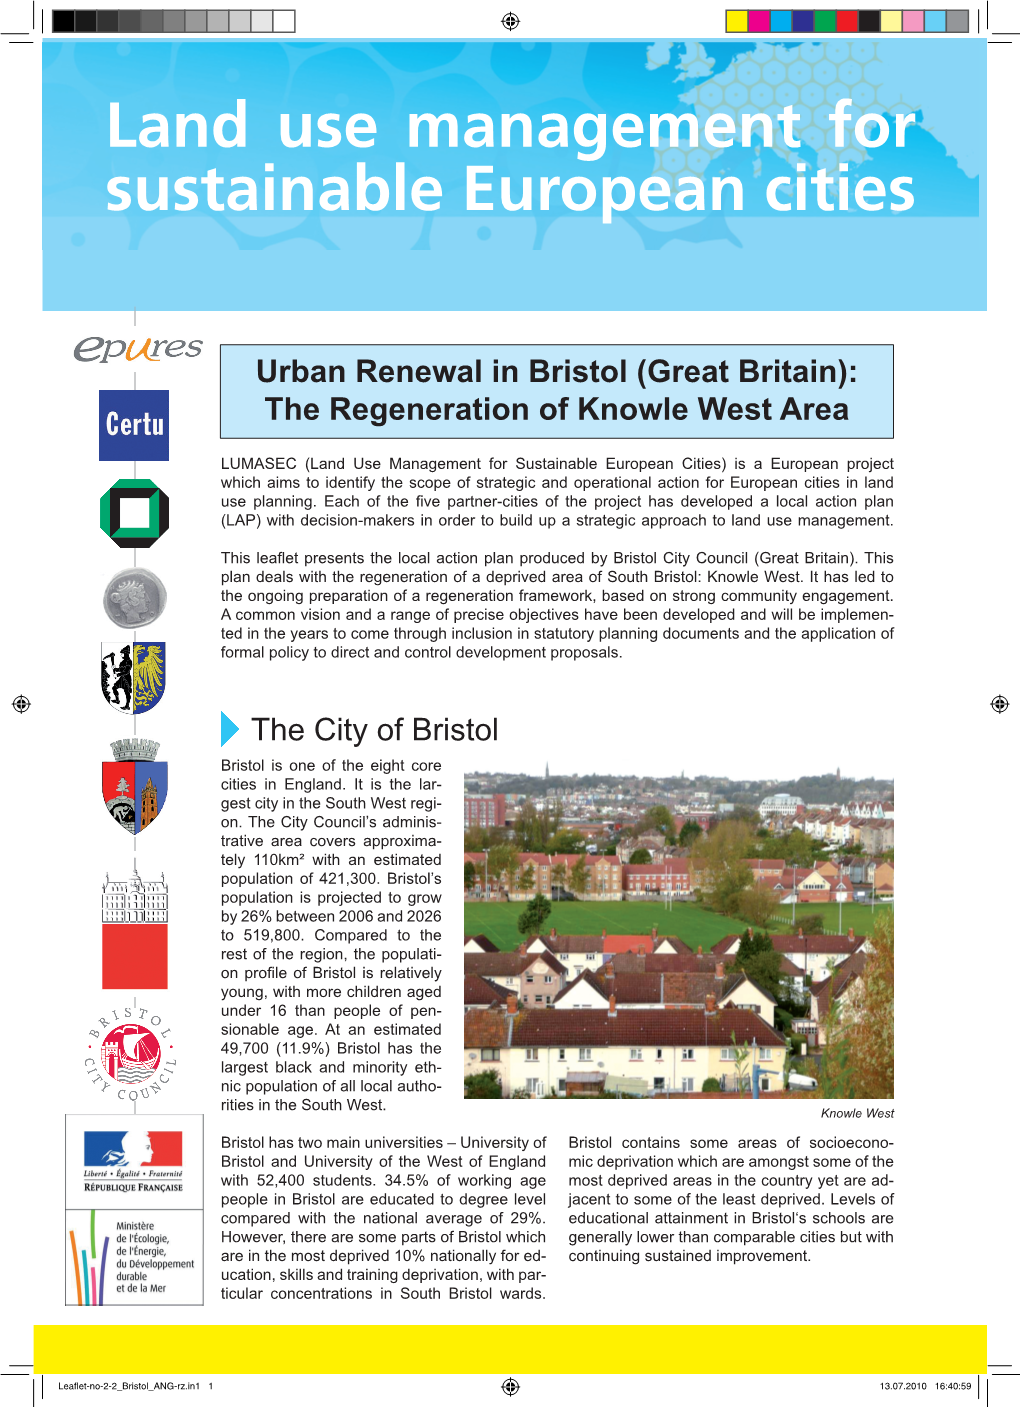 Land Use Management for Sustainable European Cities